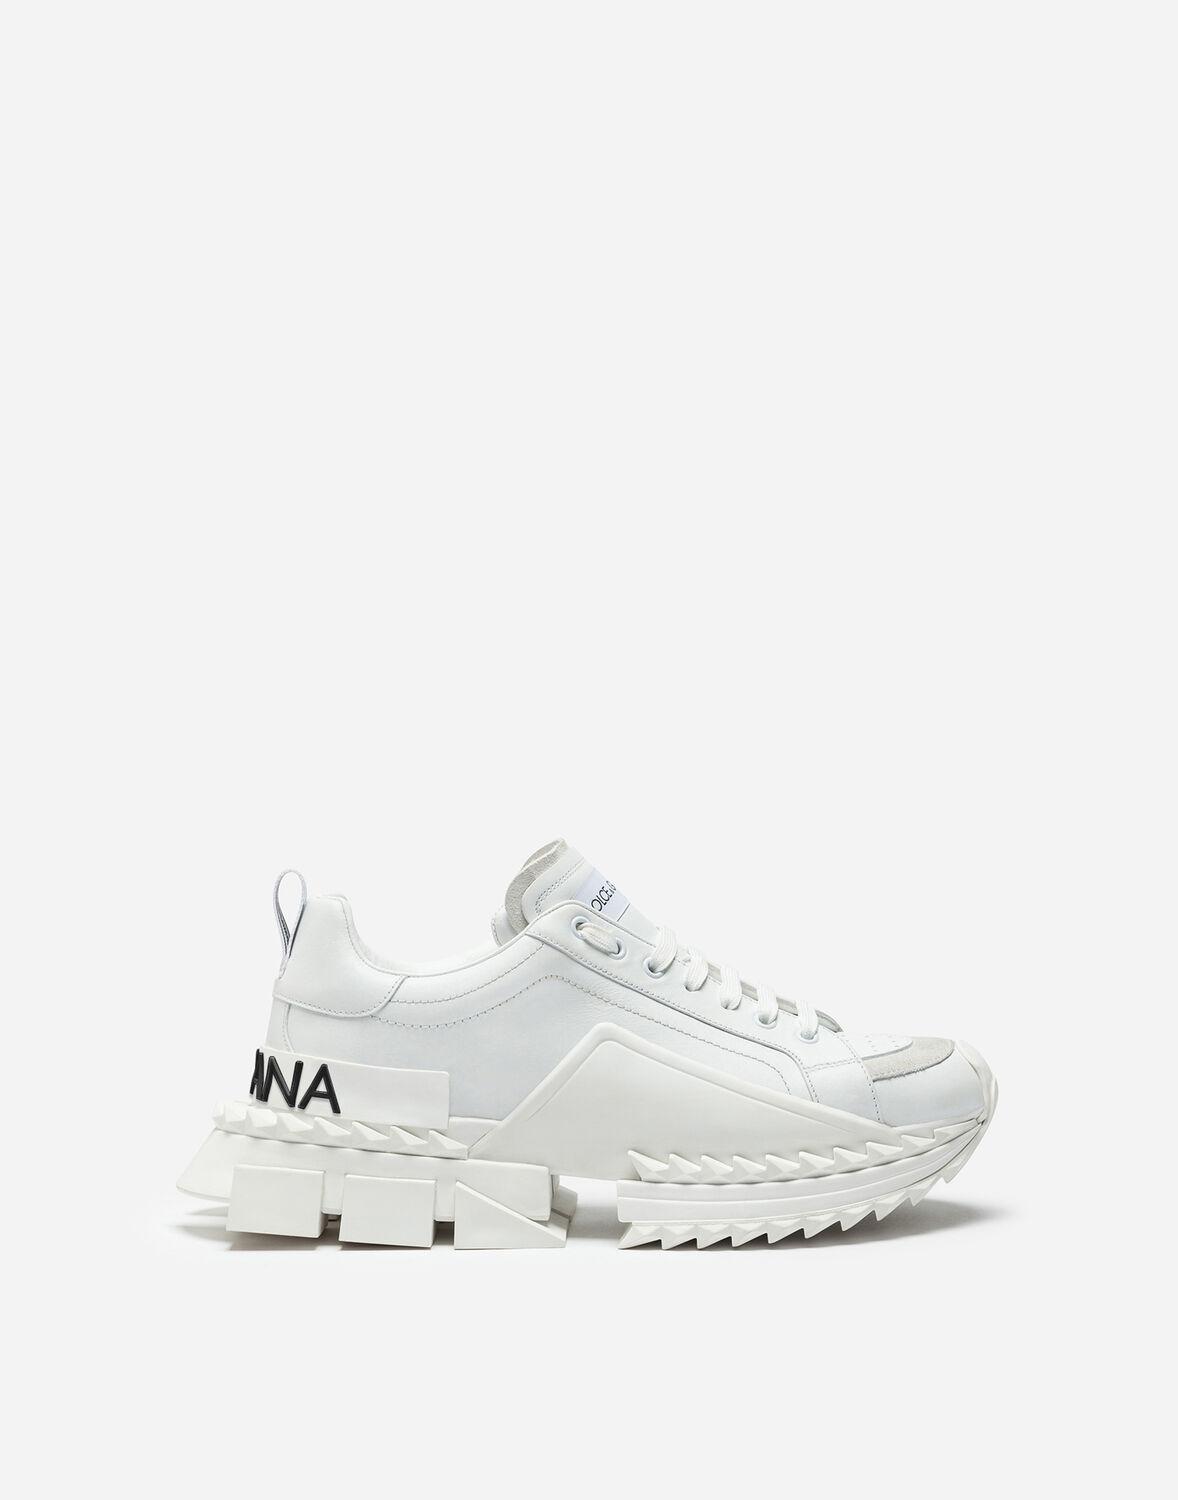 Dolce & Gabbana Leather Super Queen Sneakers In Calfskin in White - Lyst